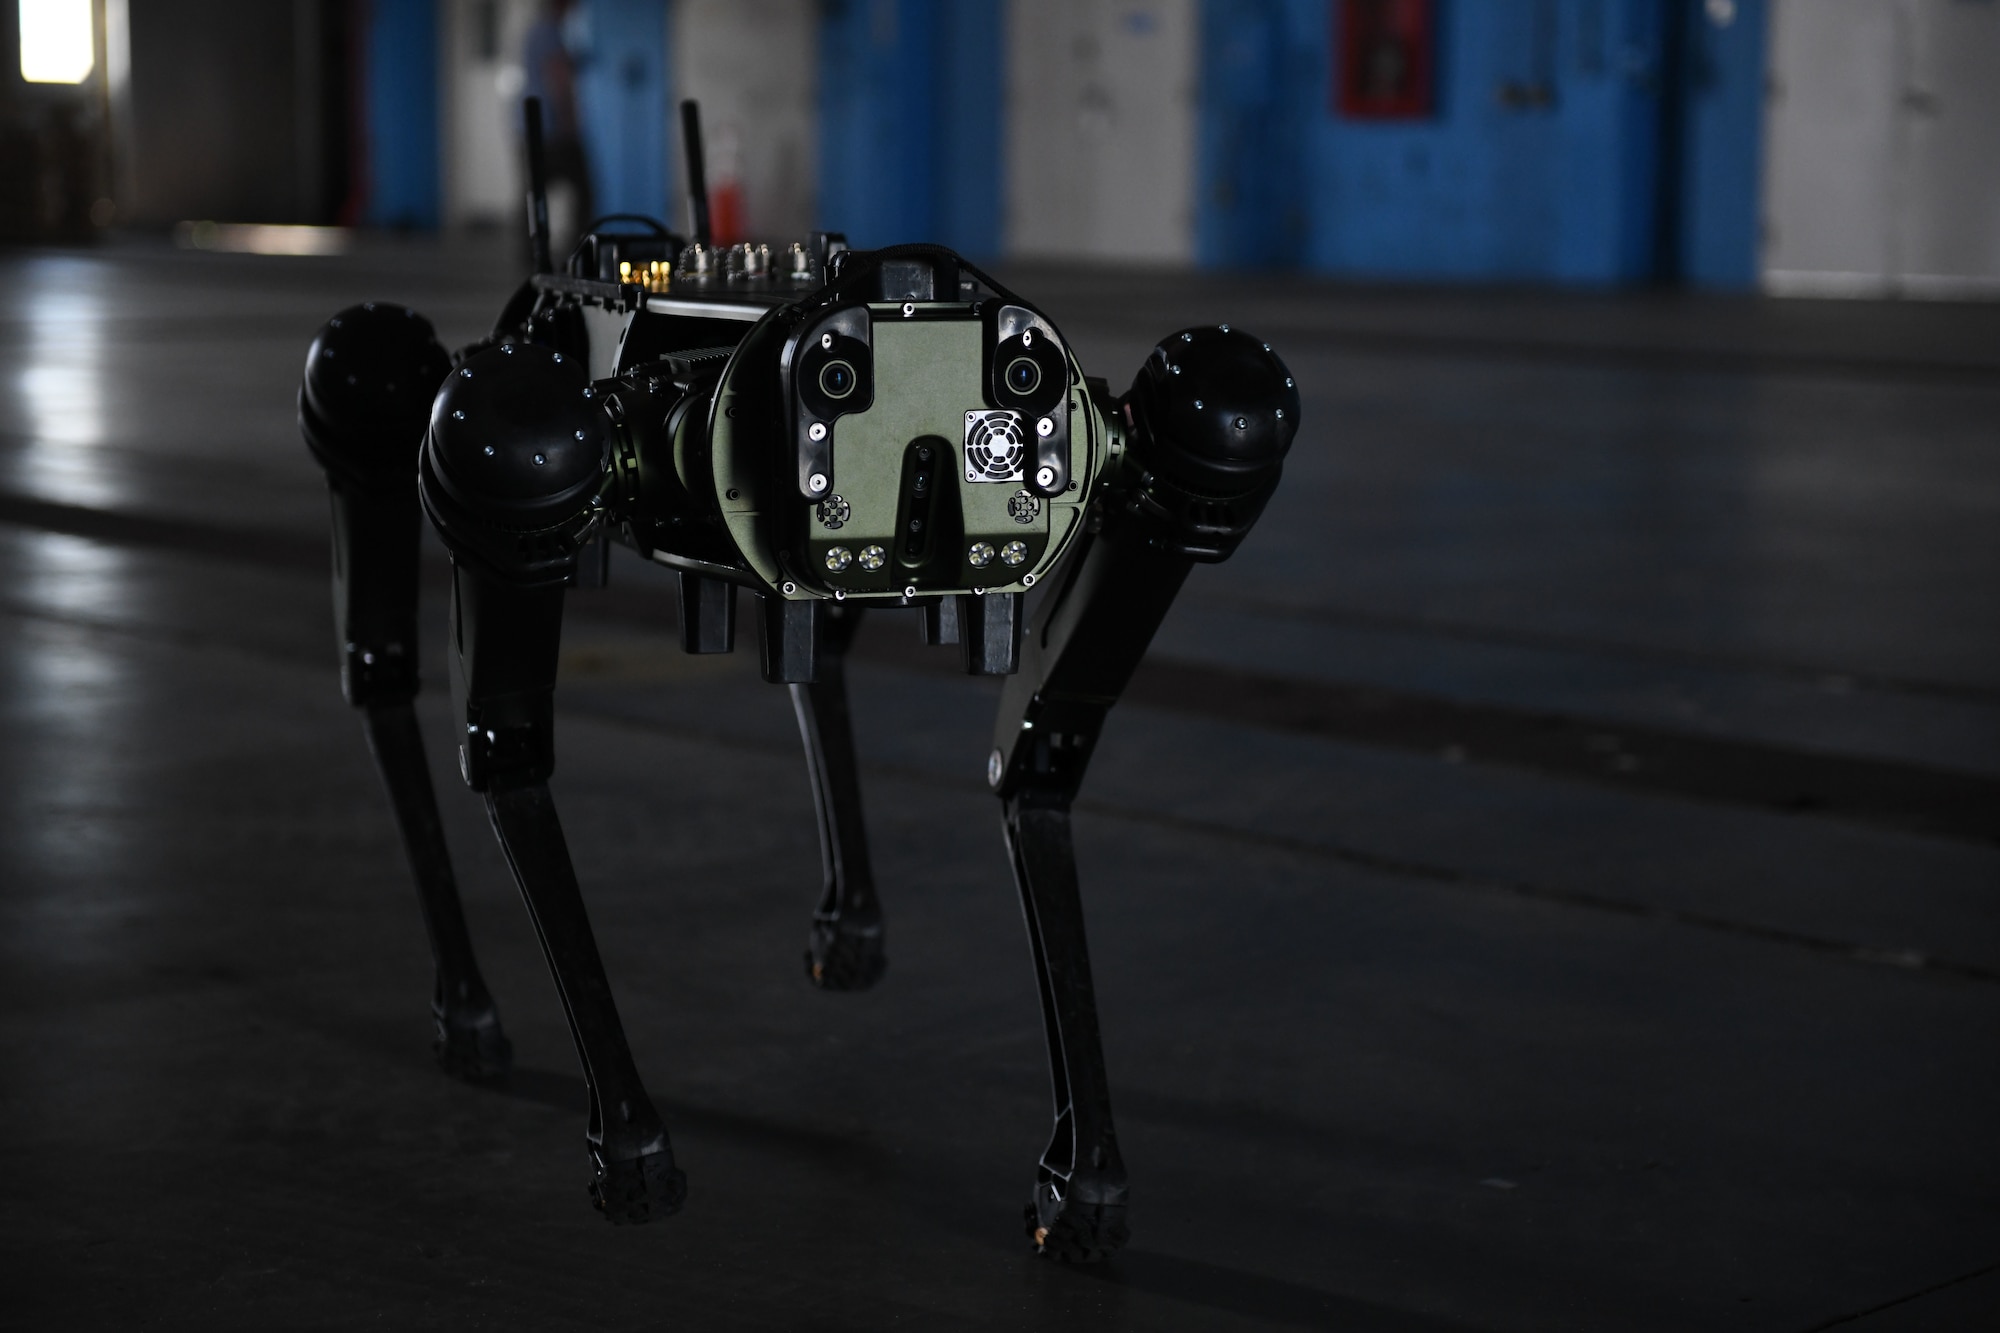 A Ghost Robotics, Vision 60 Quadruped Unmanned Ground Vehicle (Q-UGV) is operated during a demo for 45th Security Forces Squadron at Cape Canaveral Space Force Station, Fla., July 28, 2022. The Q-UGV effectively demonstrated how manual and repetitive tasks can be automated using ground-based robots. (U.S. Space Force photo by Senior Airman Samuel Becker)